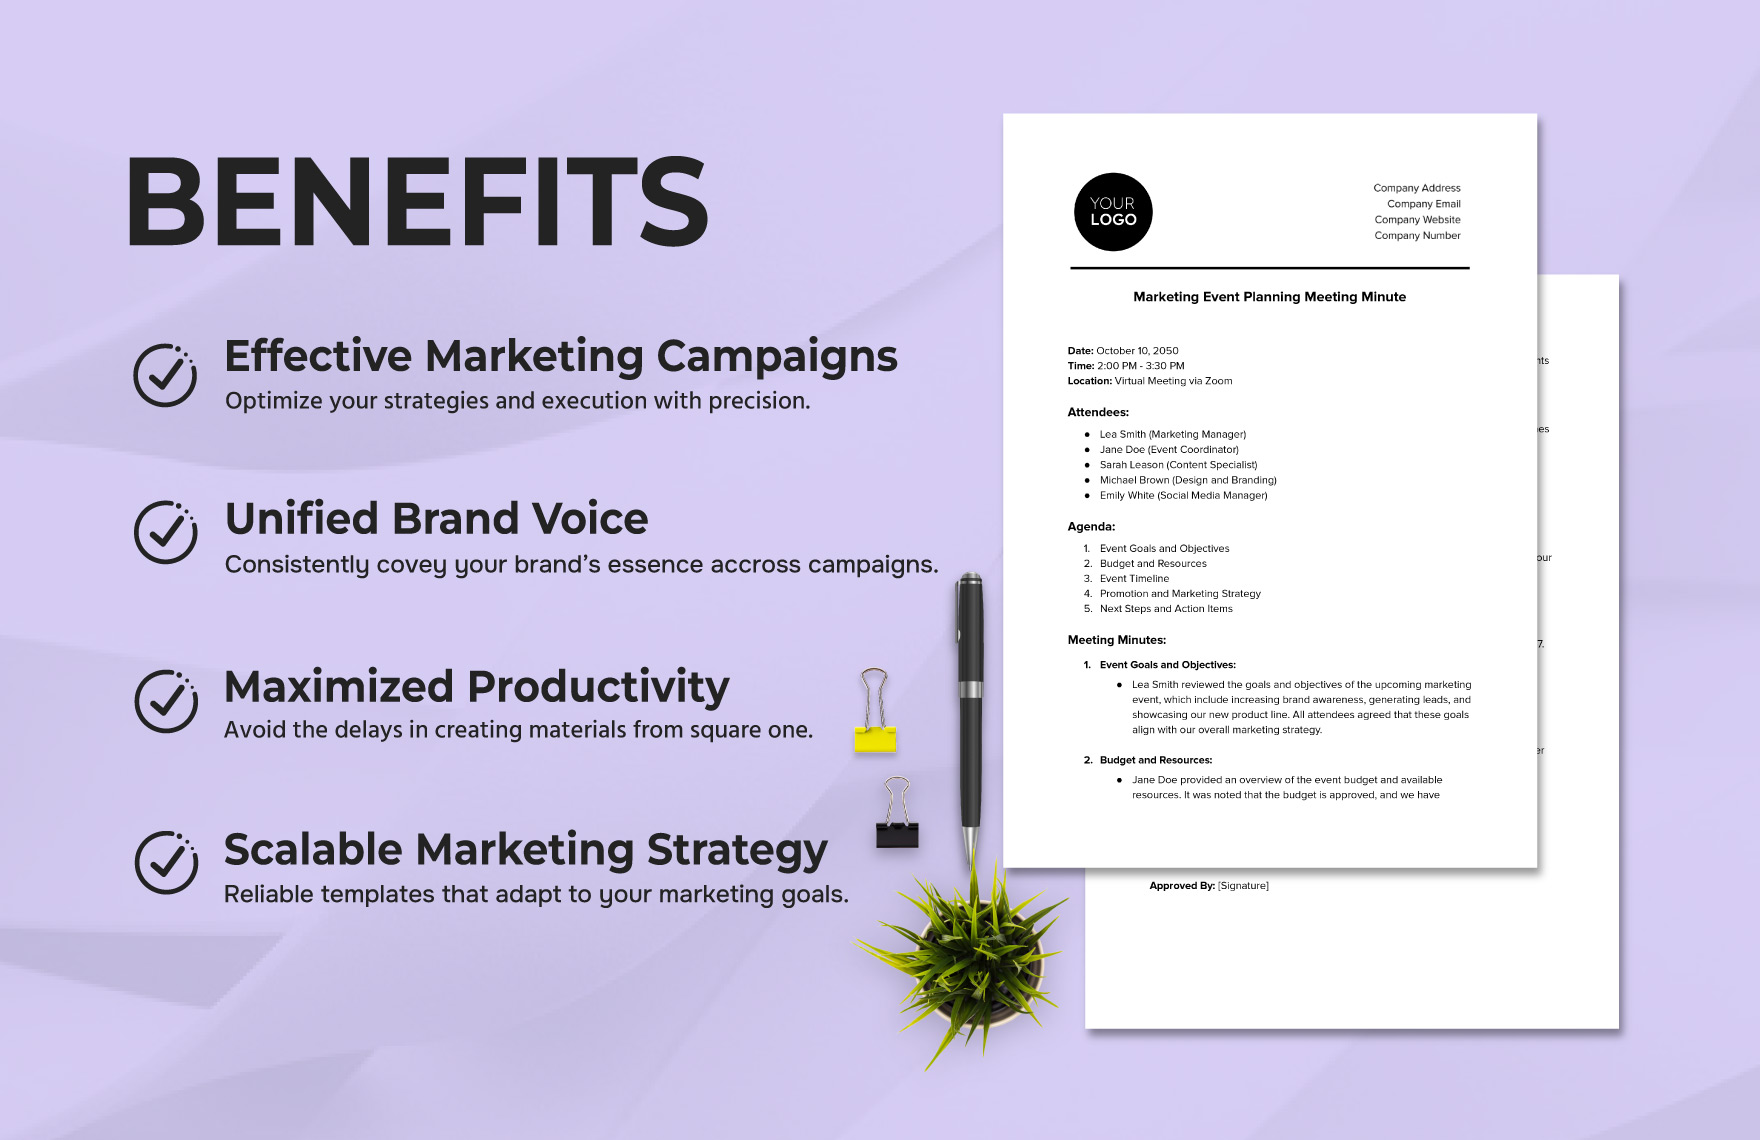 Marketing Event Planning Meeting Minute Template 